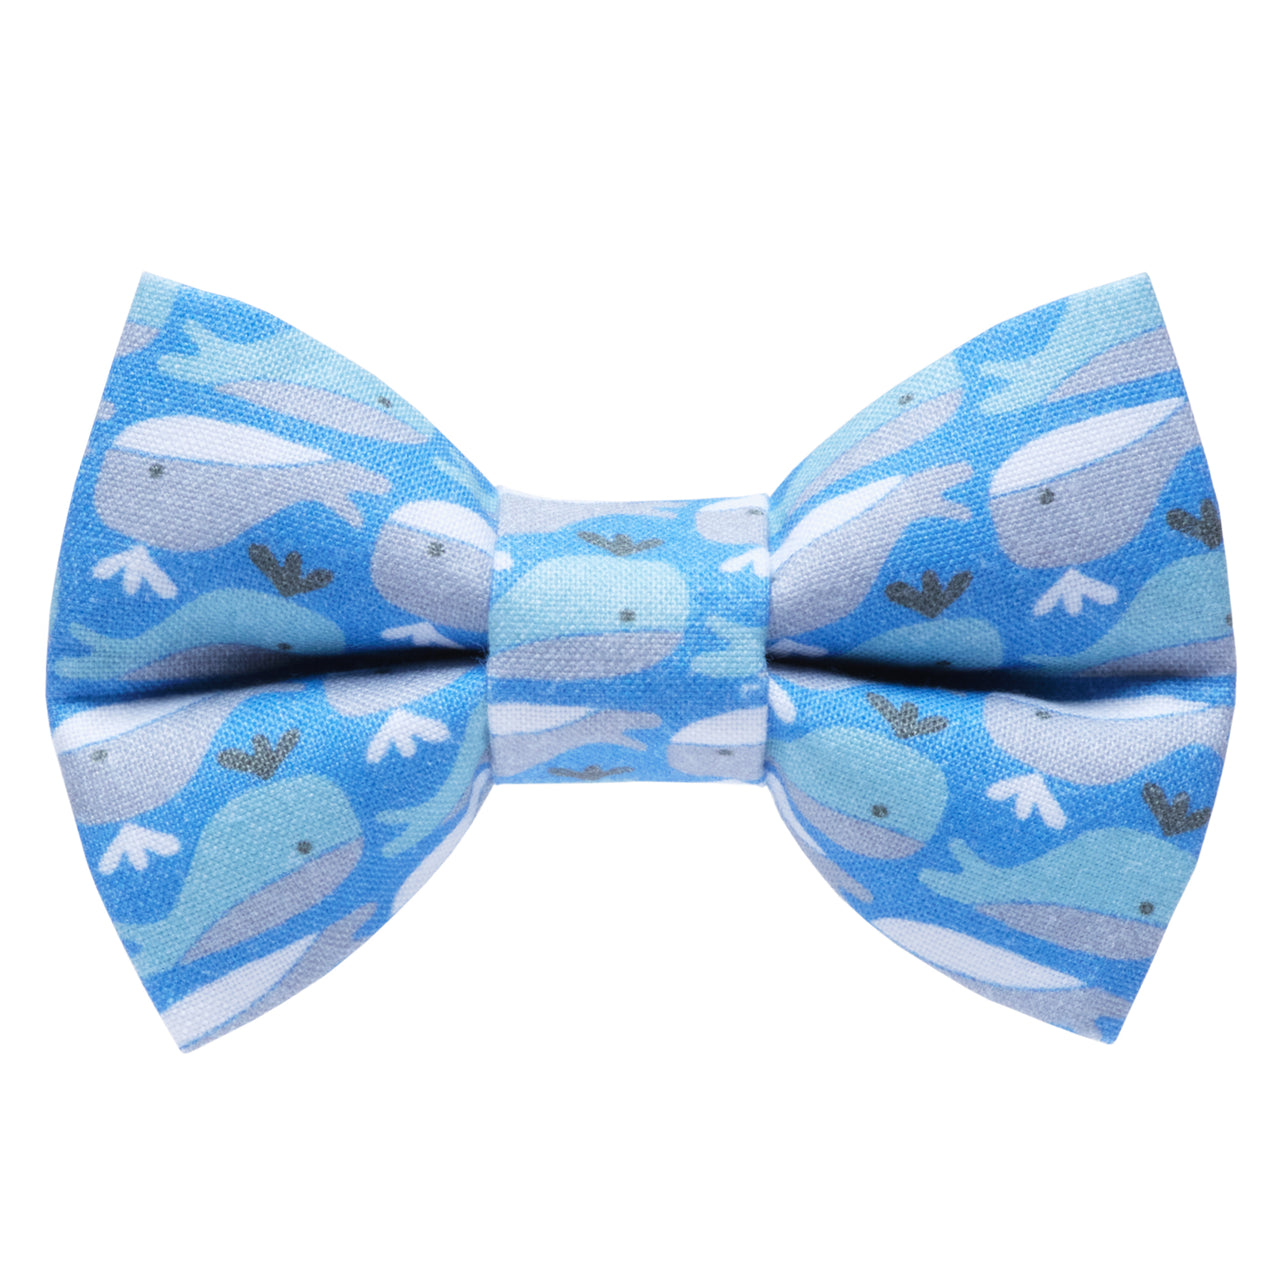 The Fin-tastic - Cat / Dog Bow Tie